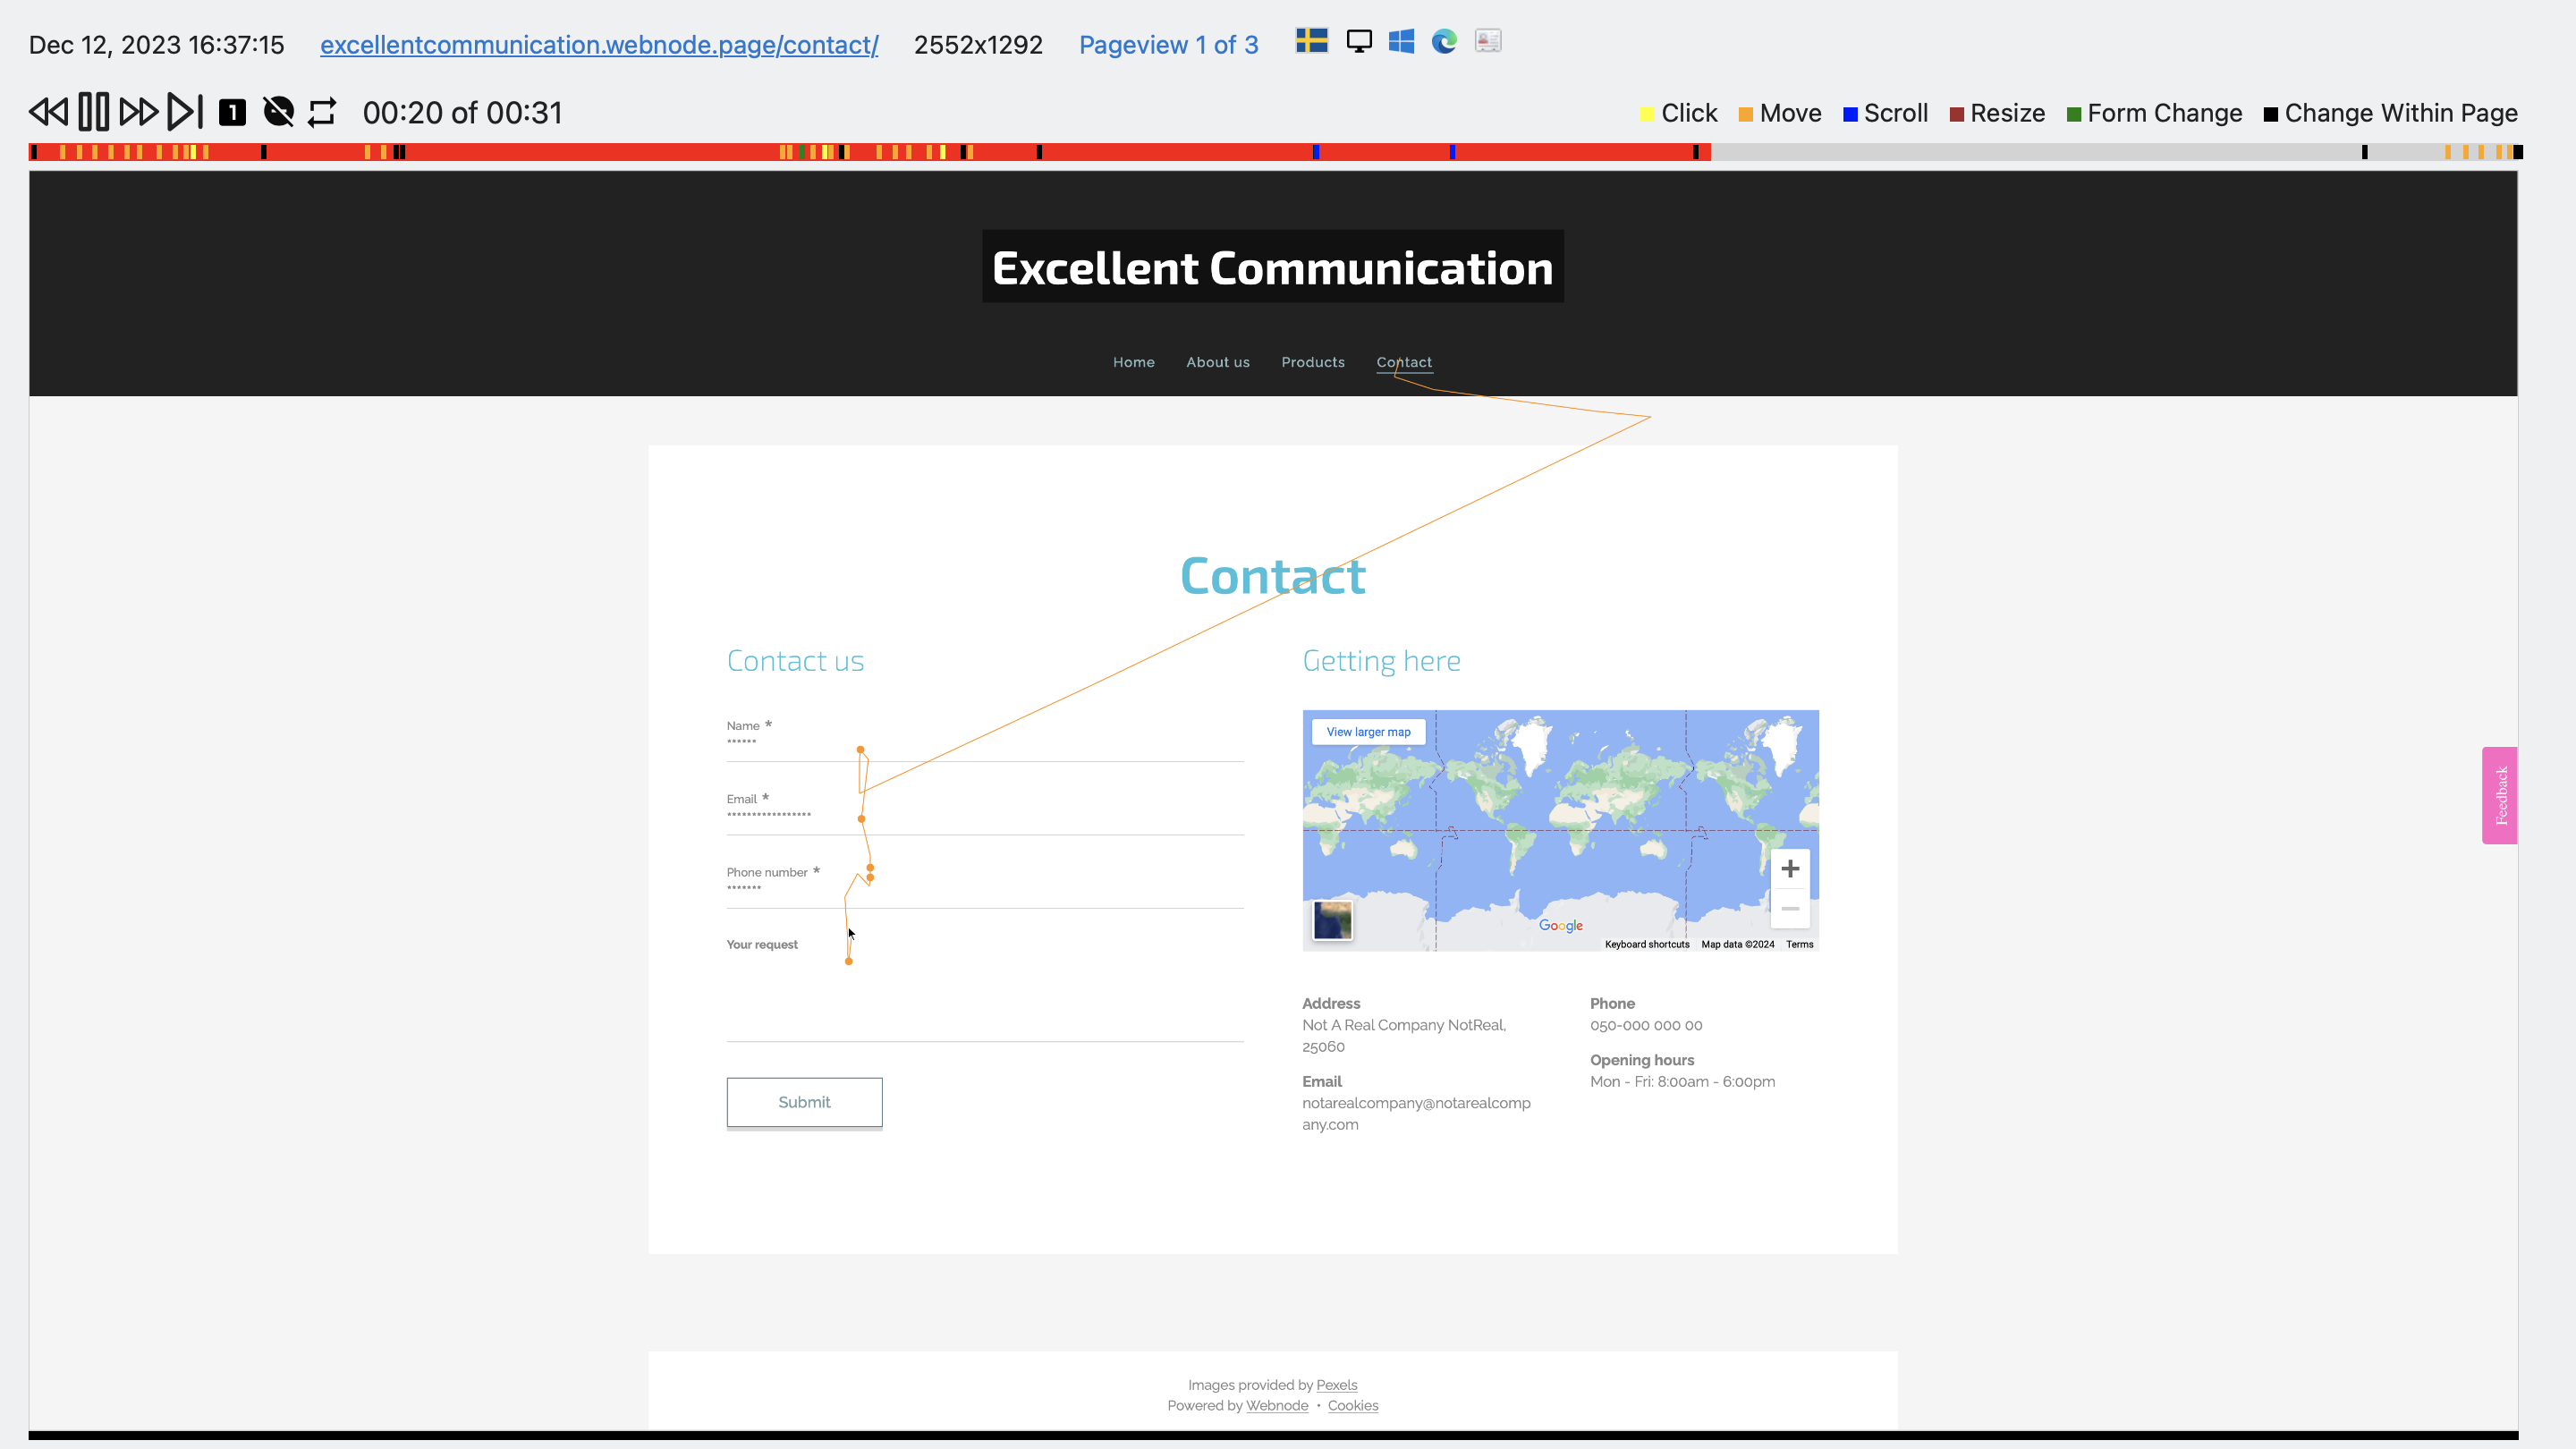 With Extellios session recordings feature, see actual user movement and journey through your website and get insights on what succeeds or fails in fulfilling user intent.